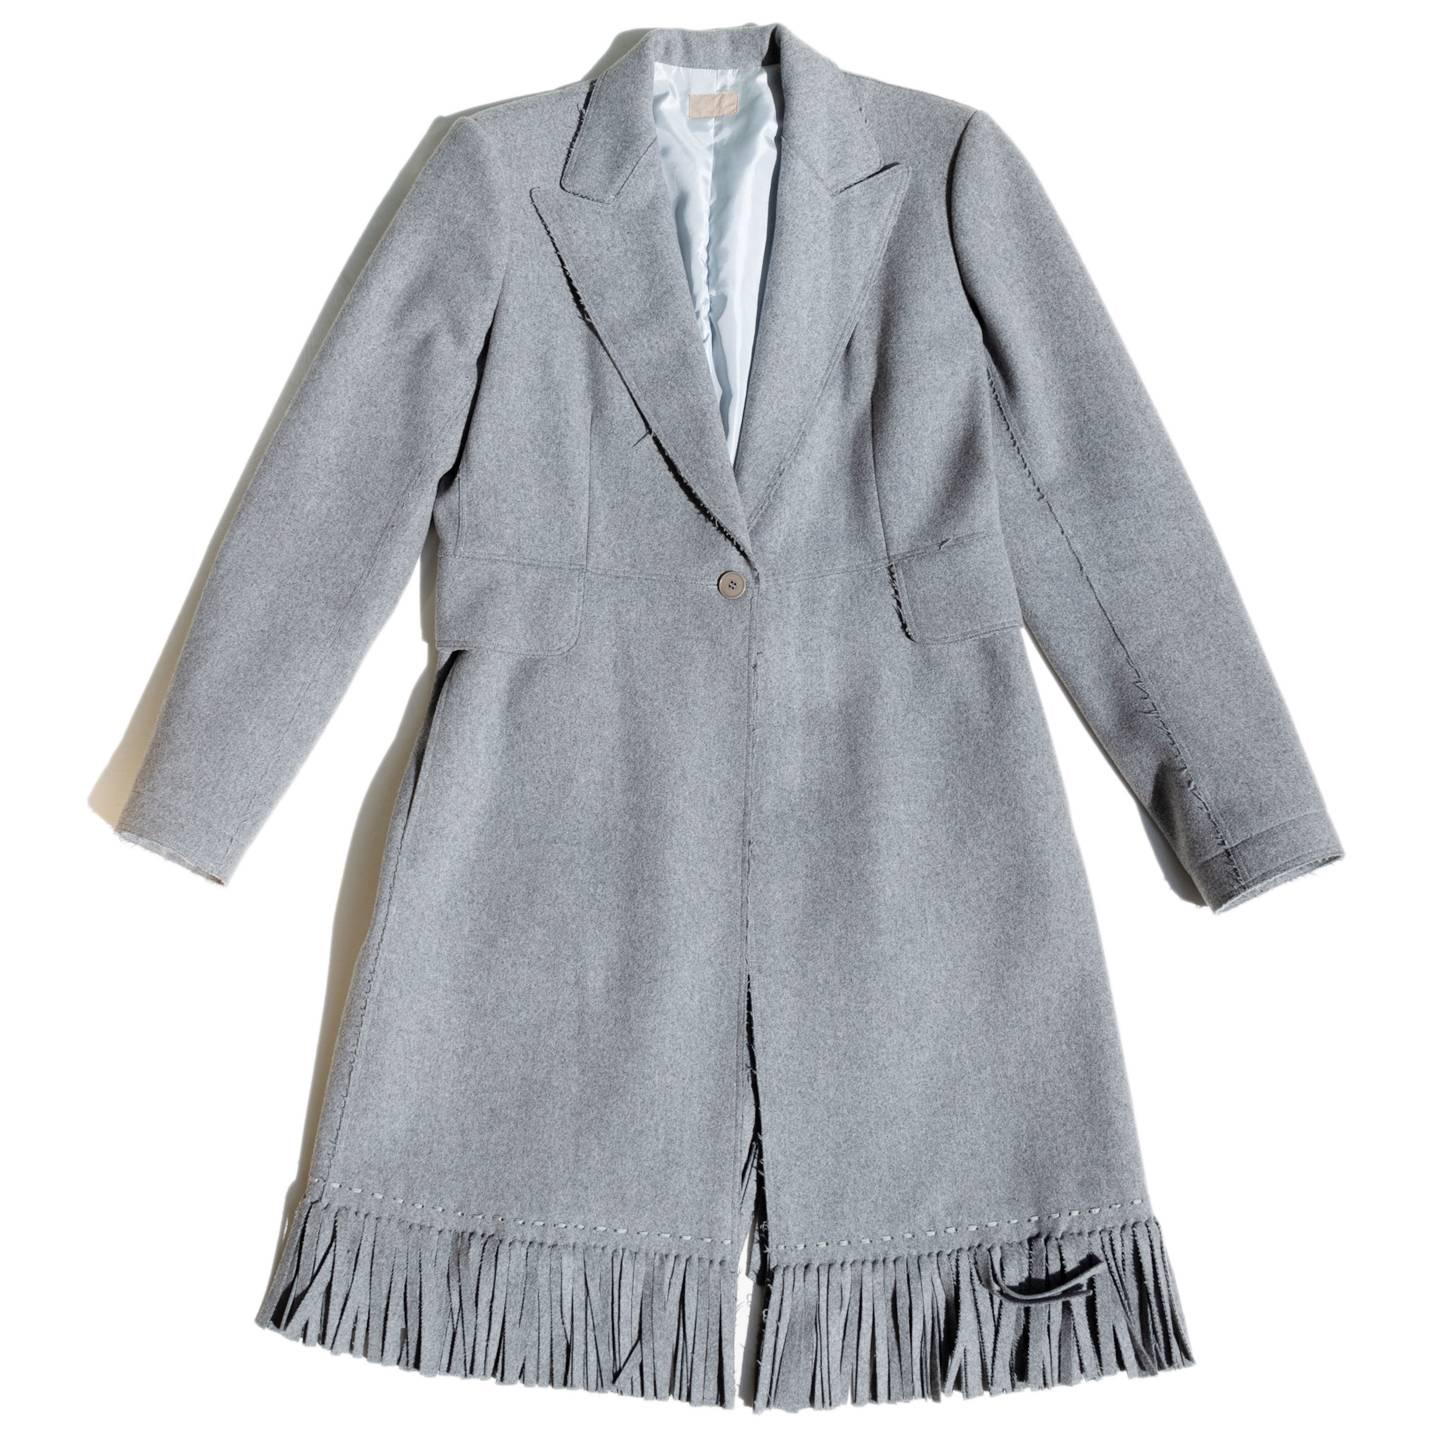 Grey Alaïa wool & cashmere blend coat featuring fringe trim throughout, peaked lapels, dual flap pockets at sides and single button closure at front.

Size  44 French sizing

Condition  Excellent: Never Worn